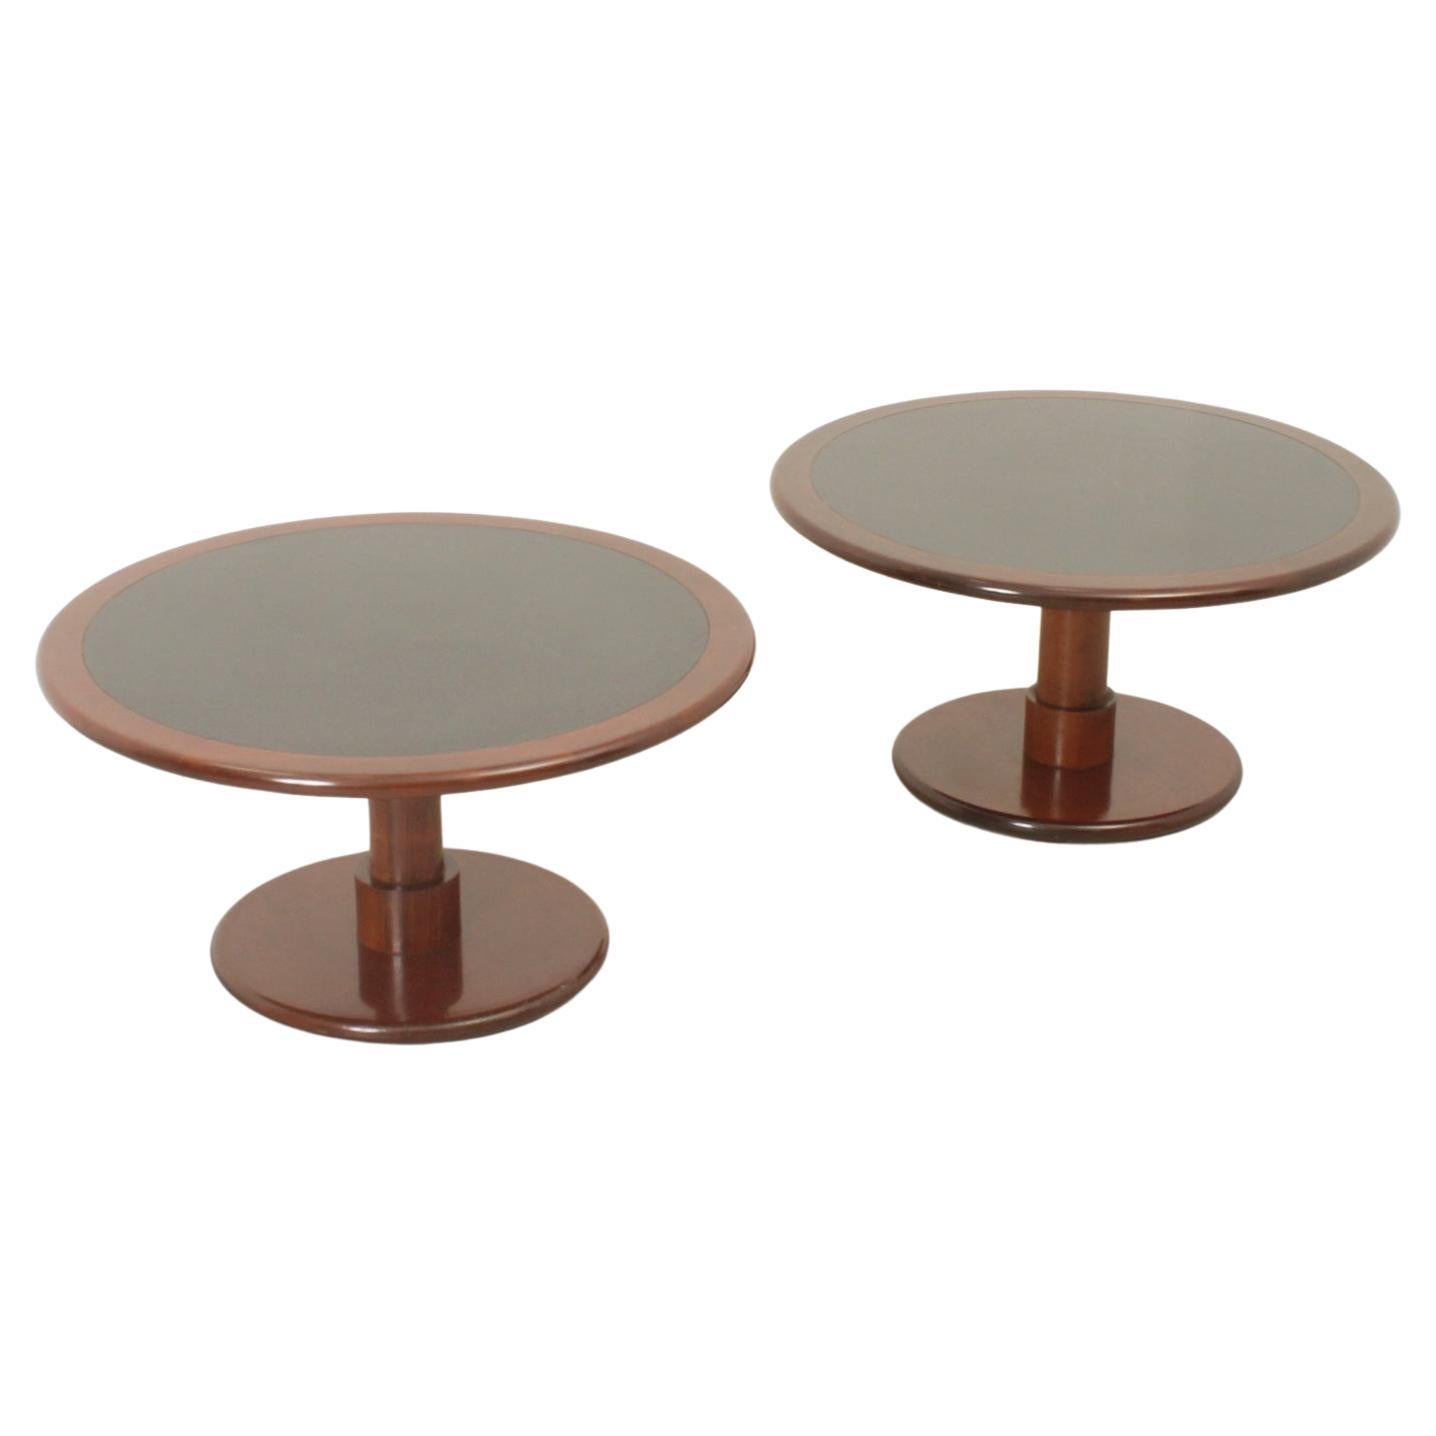 Pair of Coffee or Side Tables by Spanish Architects Correa & Milá, 1960's For Sale